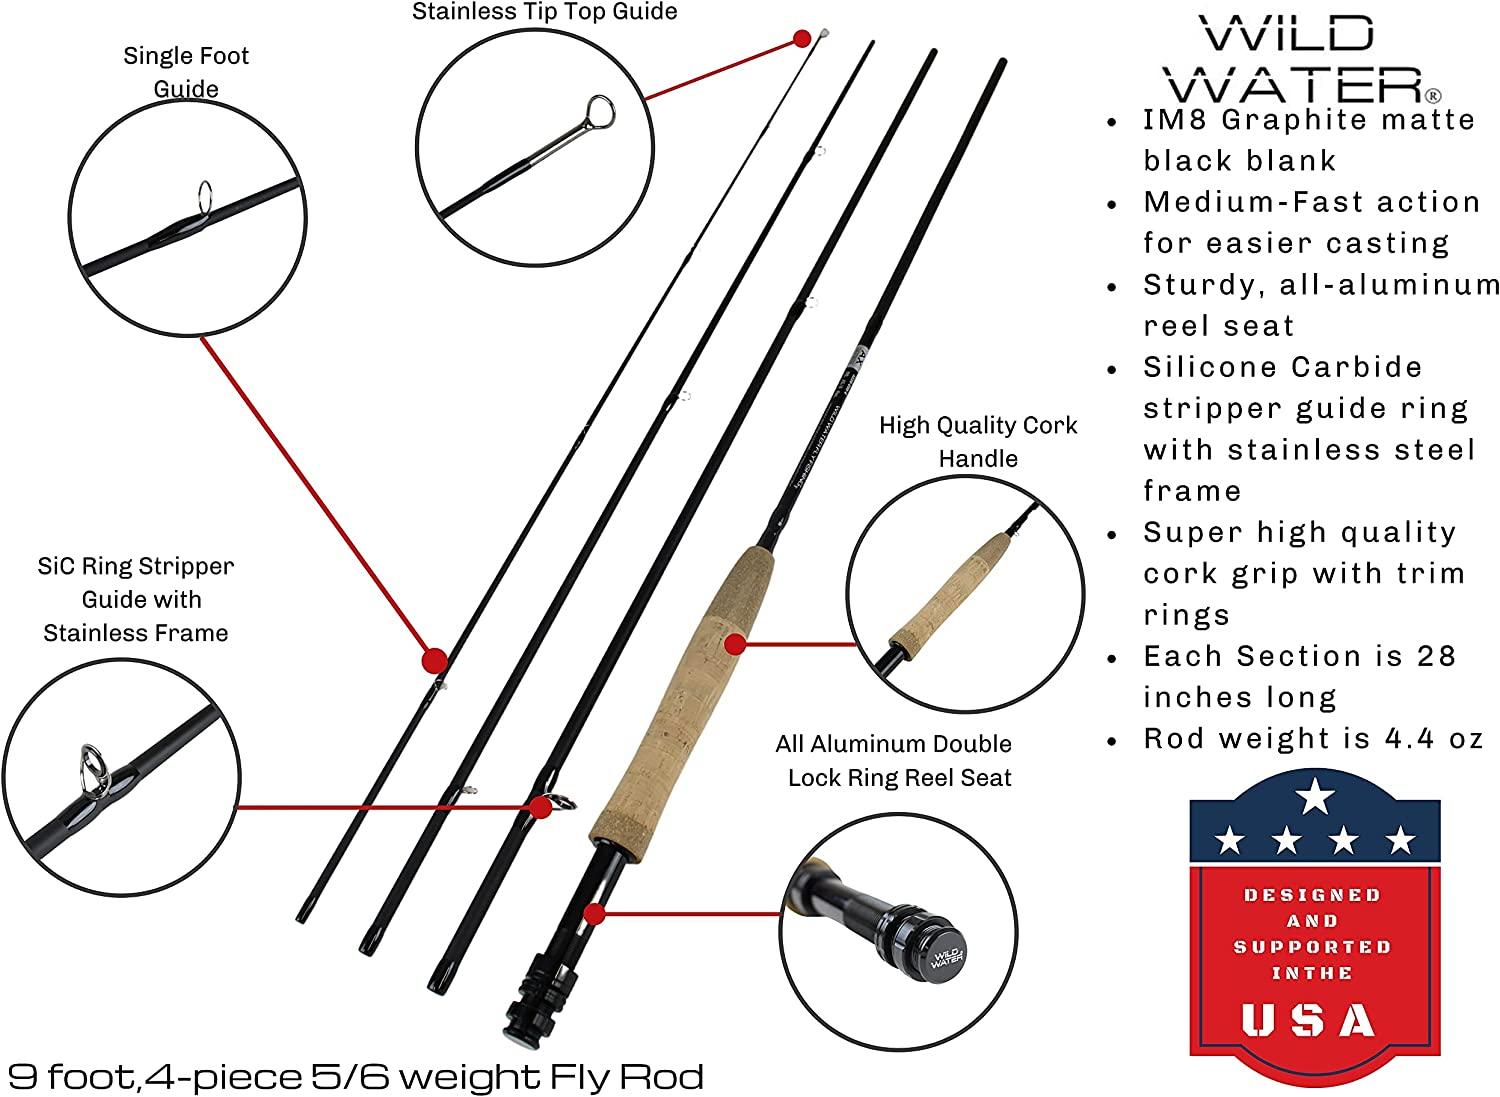 Wild Water Standard Fly Fishing Combo Starter Kit 5 or 6 Weight 9 Foot Fly  Rod 4-Piece Graphite Rod with Cork Handle Accessories Die Cast Aluminum Reel  Carrying Case Fly Box Case Fishing Flies